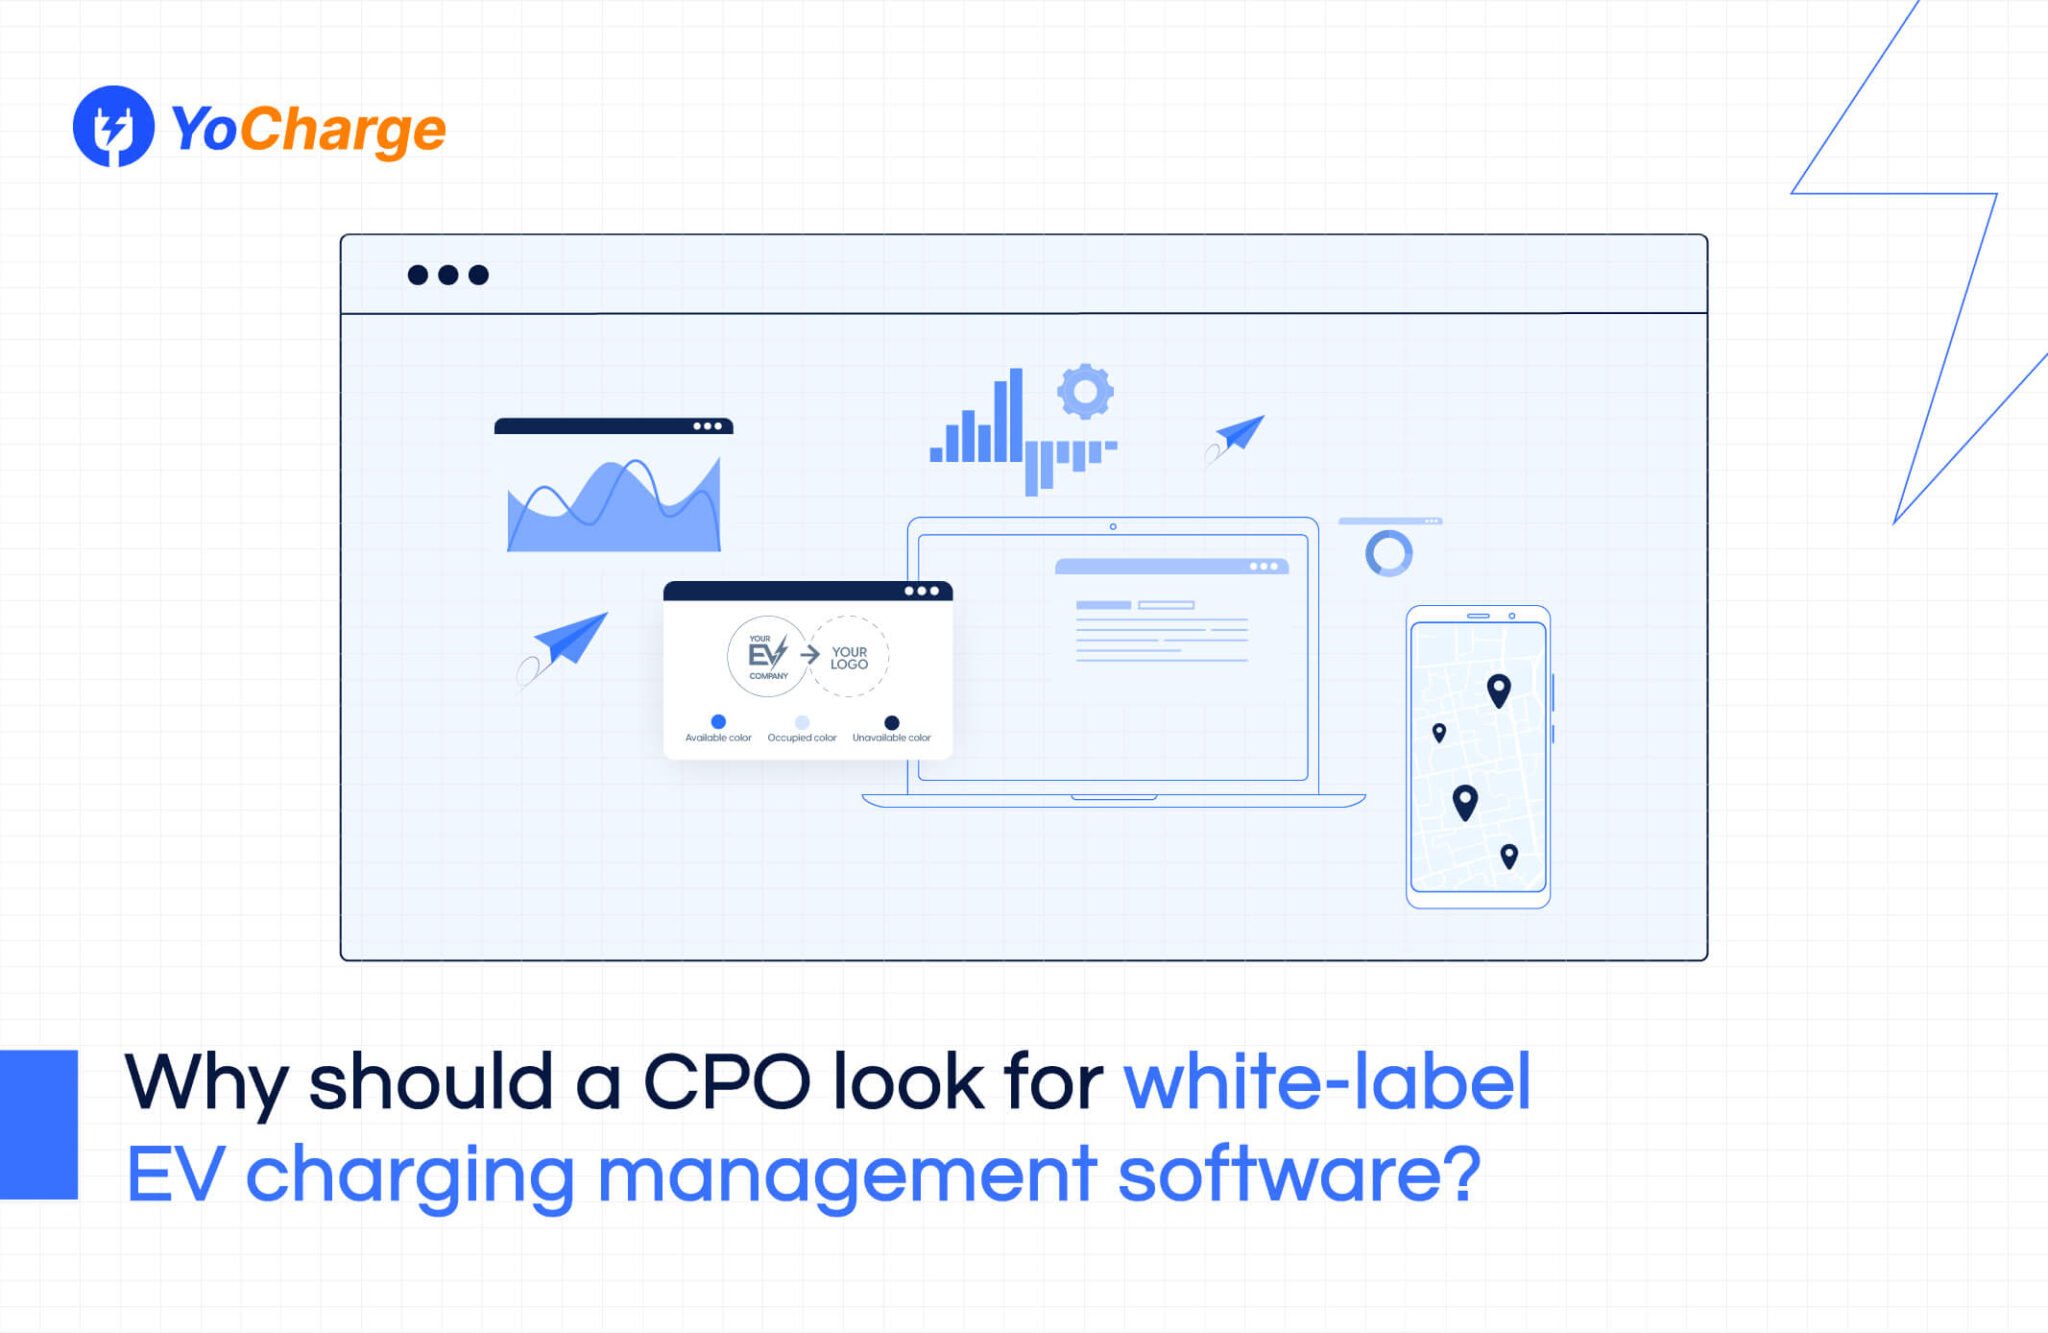 Why Should a CPO Look for White Label EV Charging Management Software